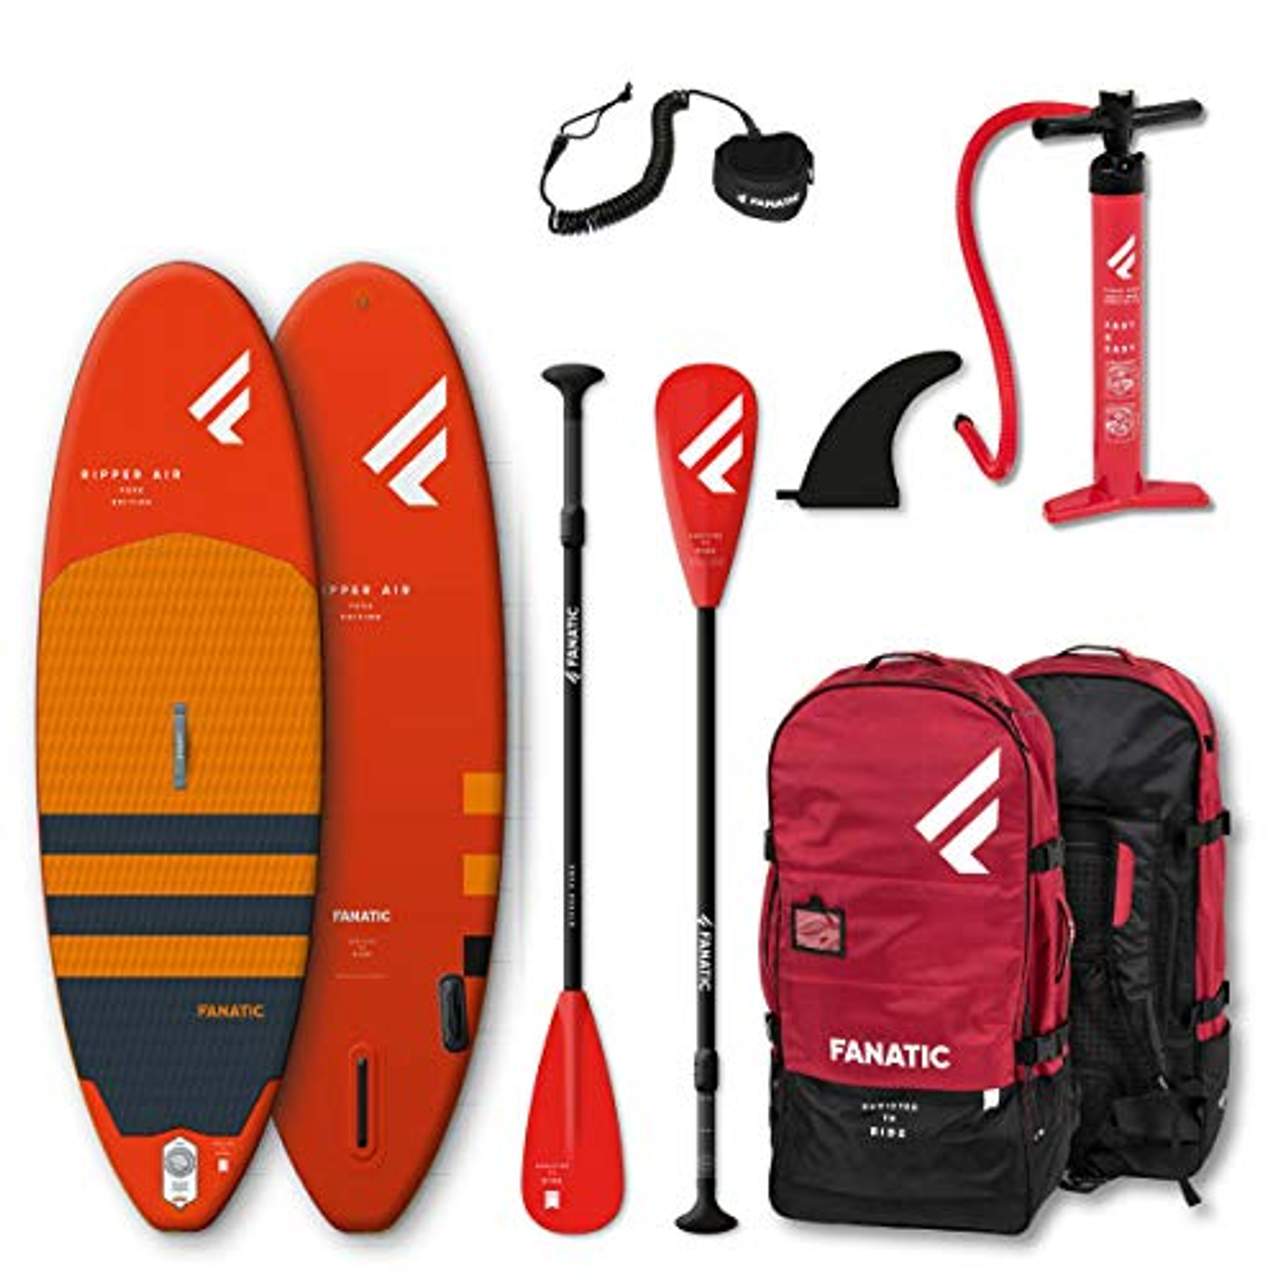 Fanatic Ripper Air 7';10"Aufblasbares SUP Stand Up Paddle Boarding Paket